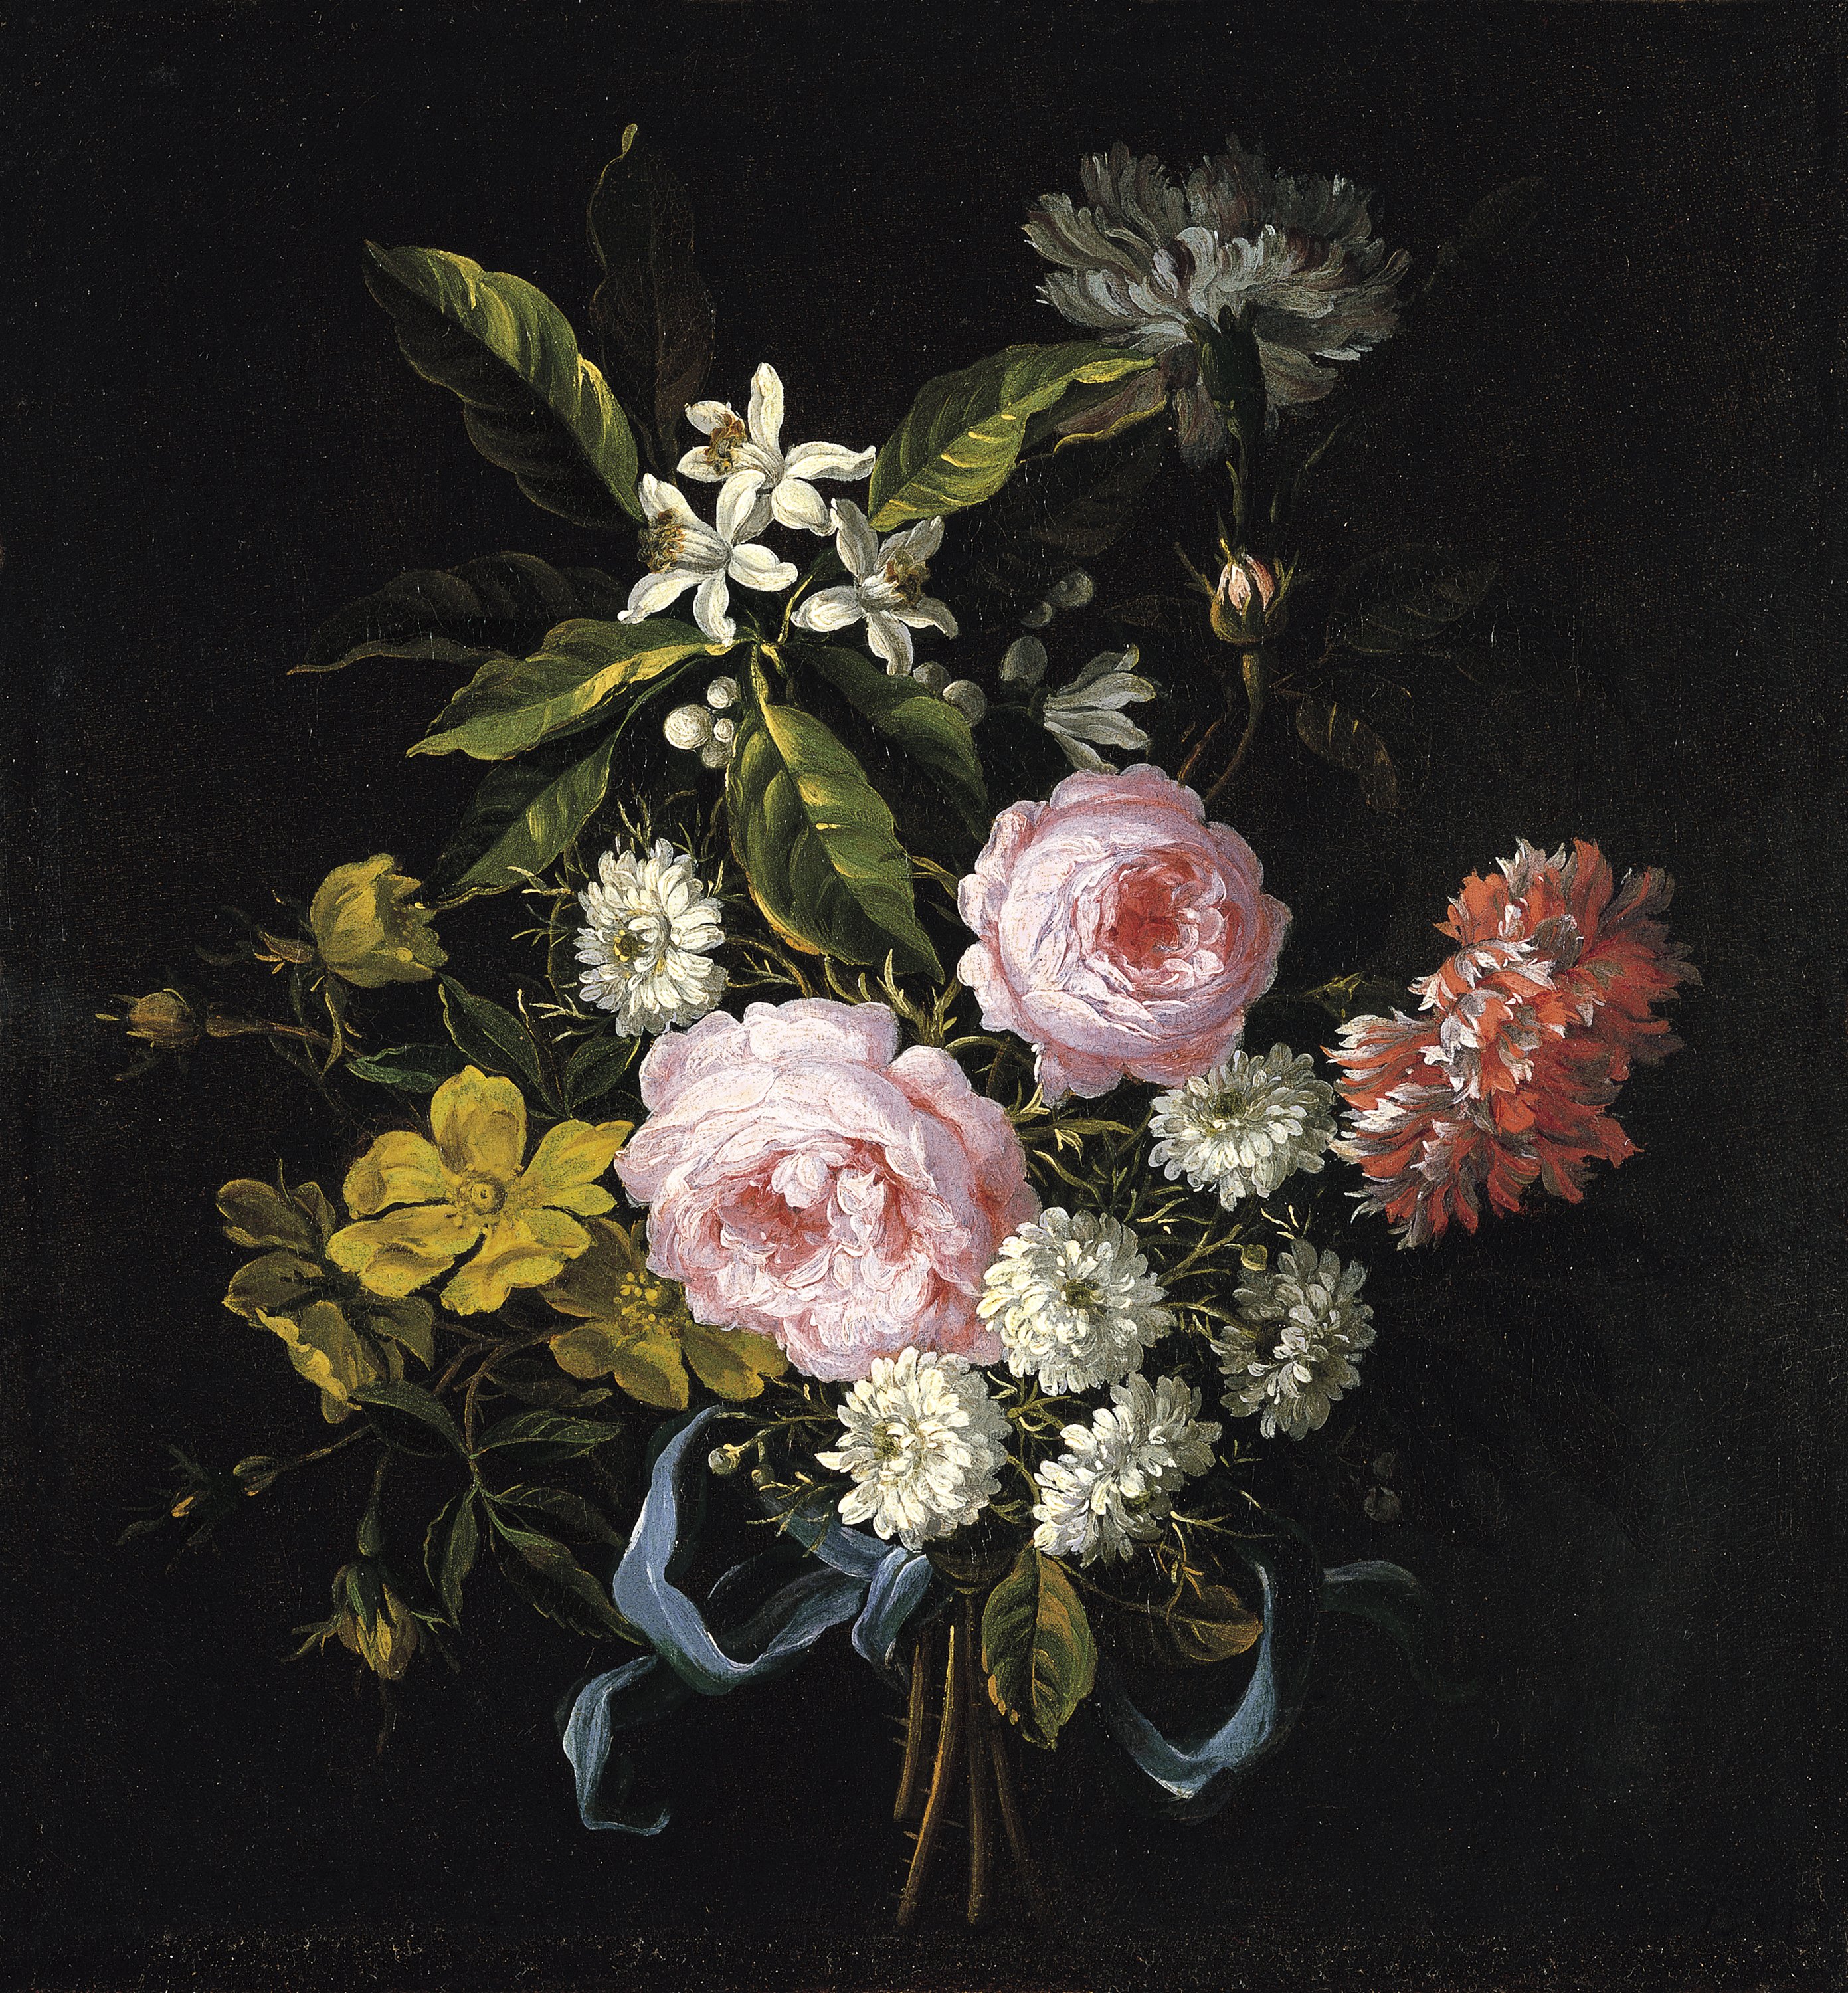 A Bouquet of Chamomile, French Roses and other Flowers. Ramo compuesto por manzanilla, rosas francesas y otras flores